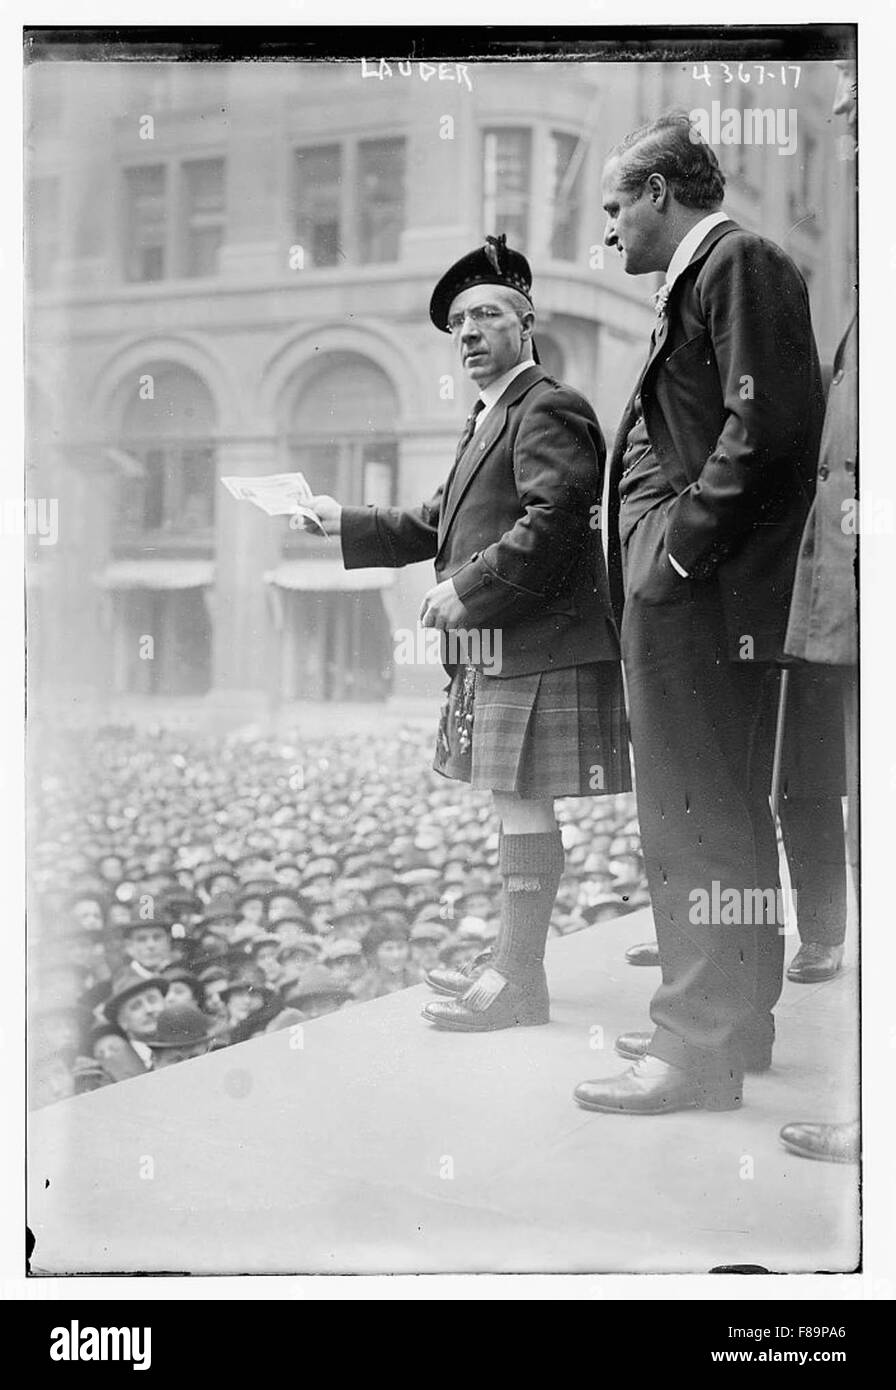 Bain News Service,, publisher. Lauder [between ca. 1915 and ca. 1920] Stock Photo